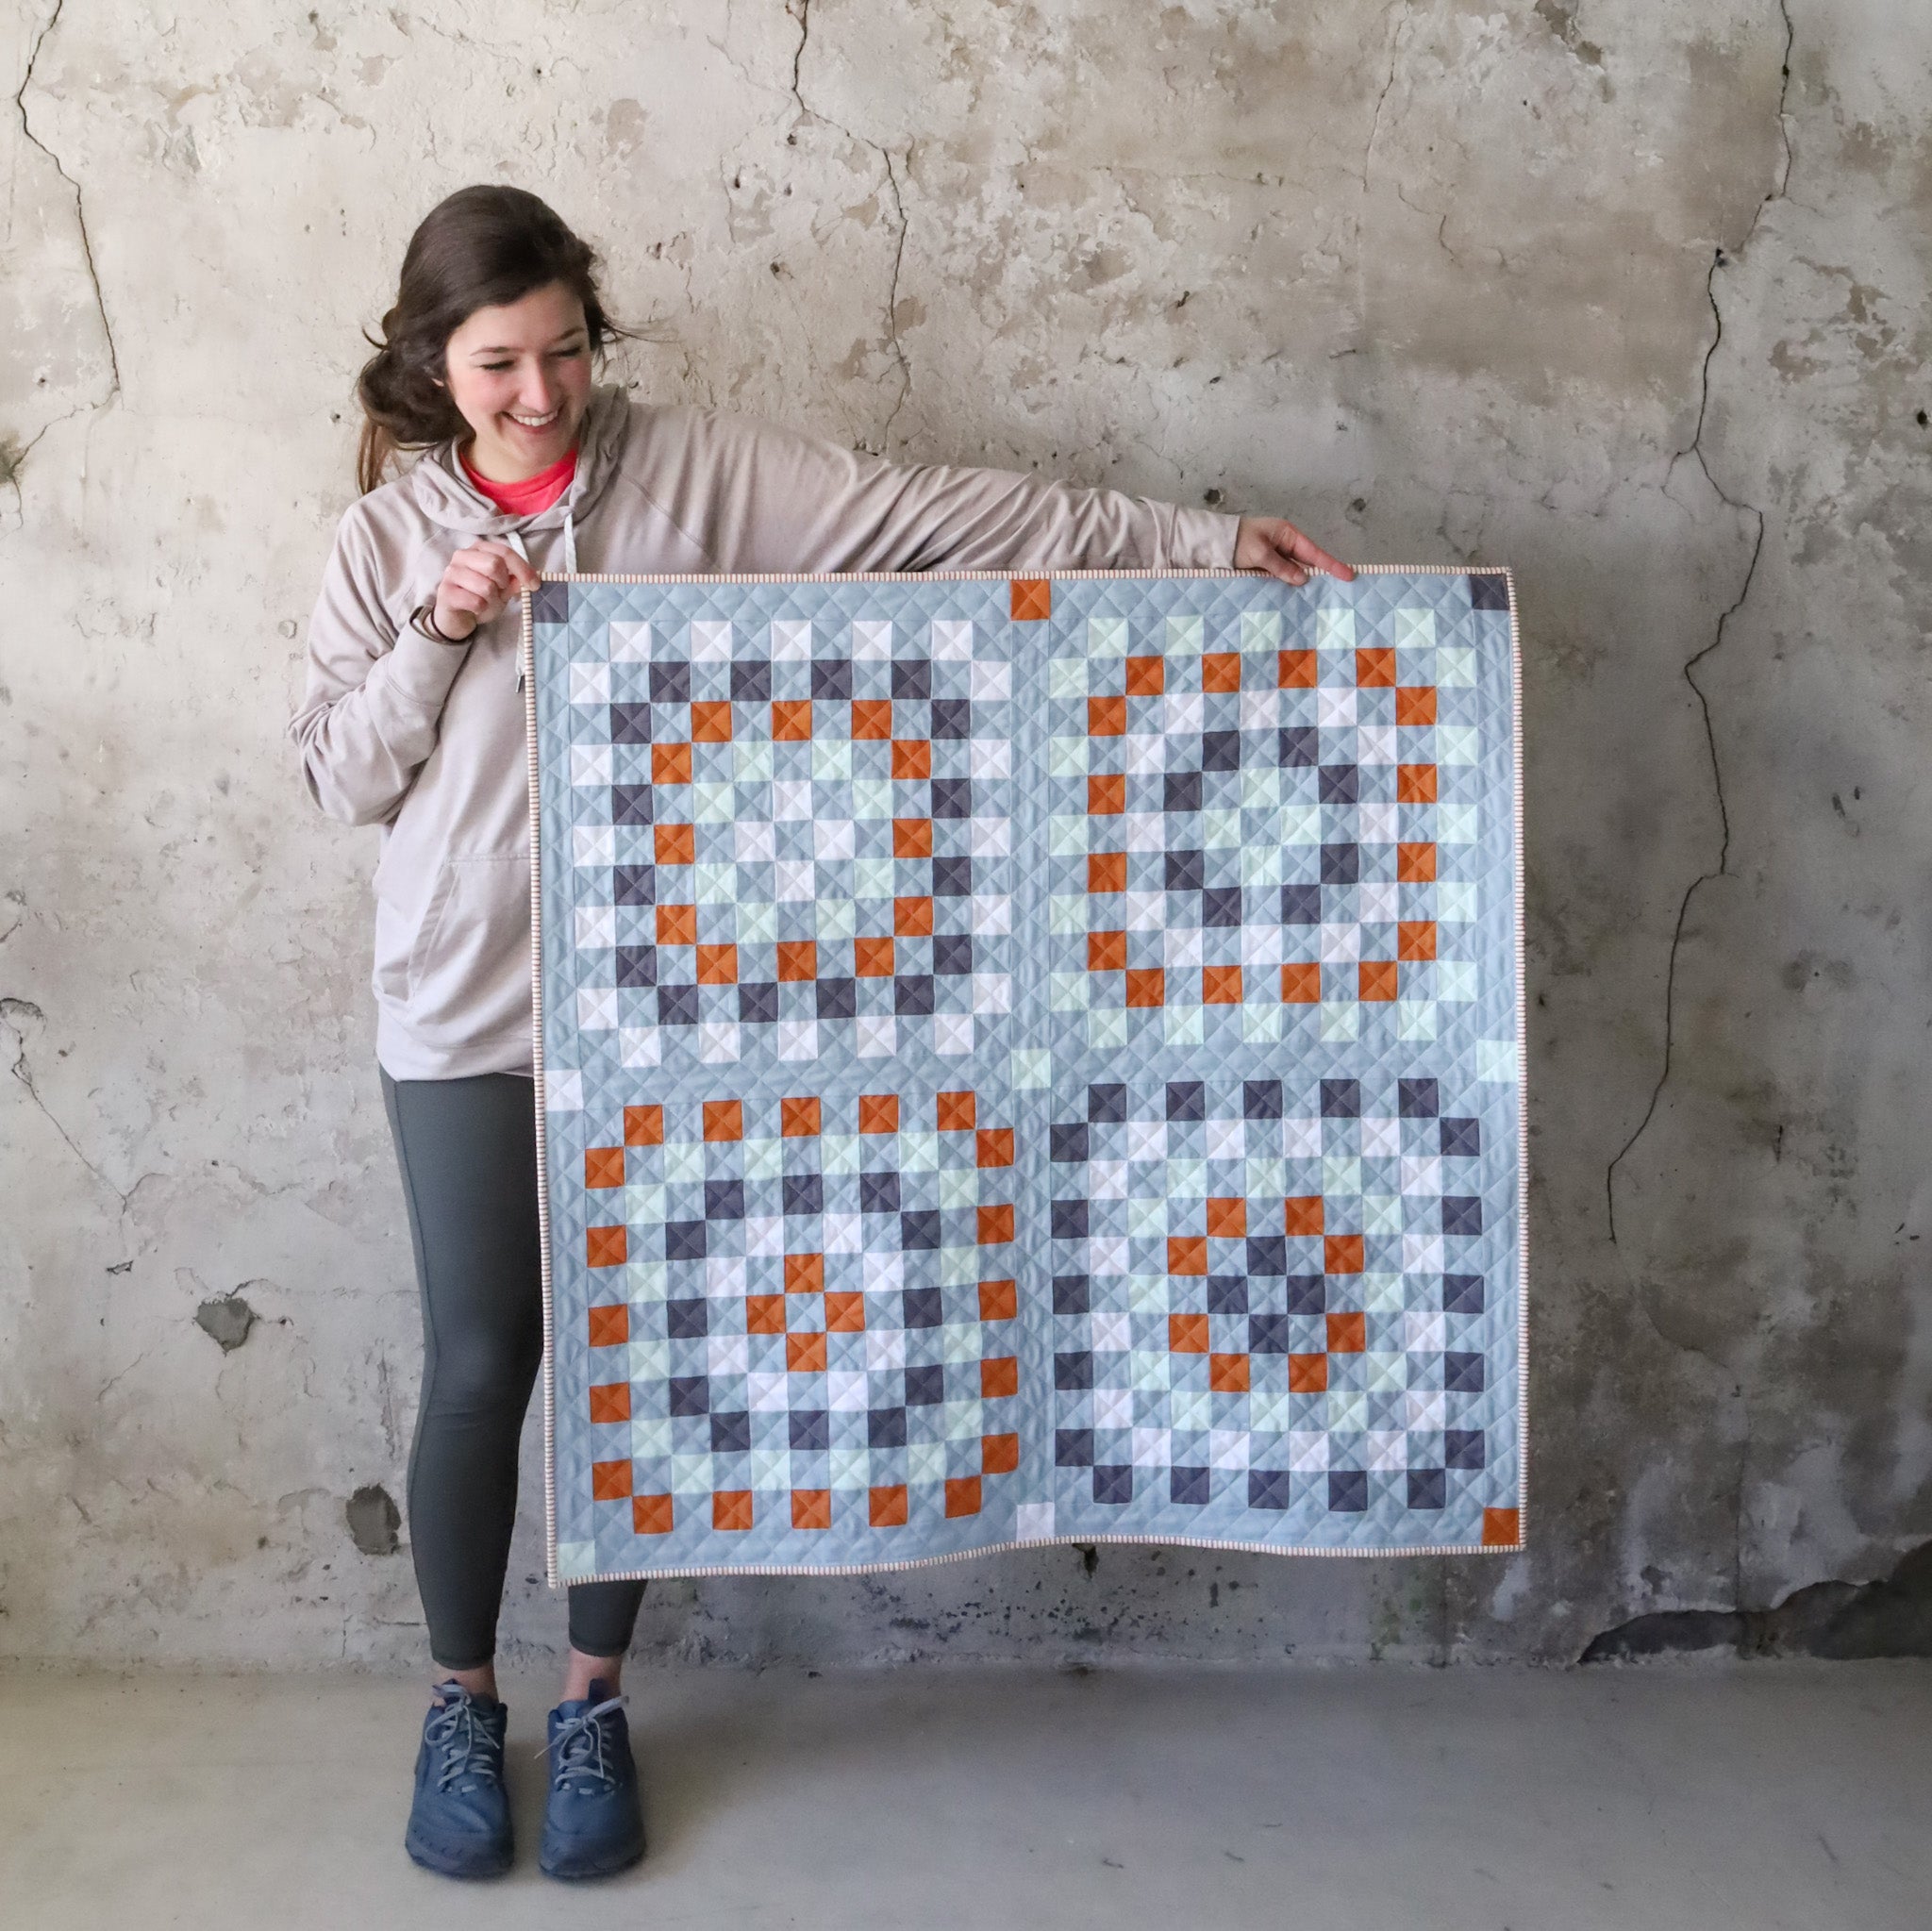 Granny Patch Quilt - the Campfire baby version